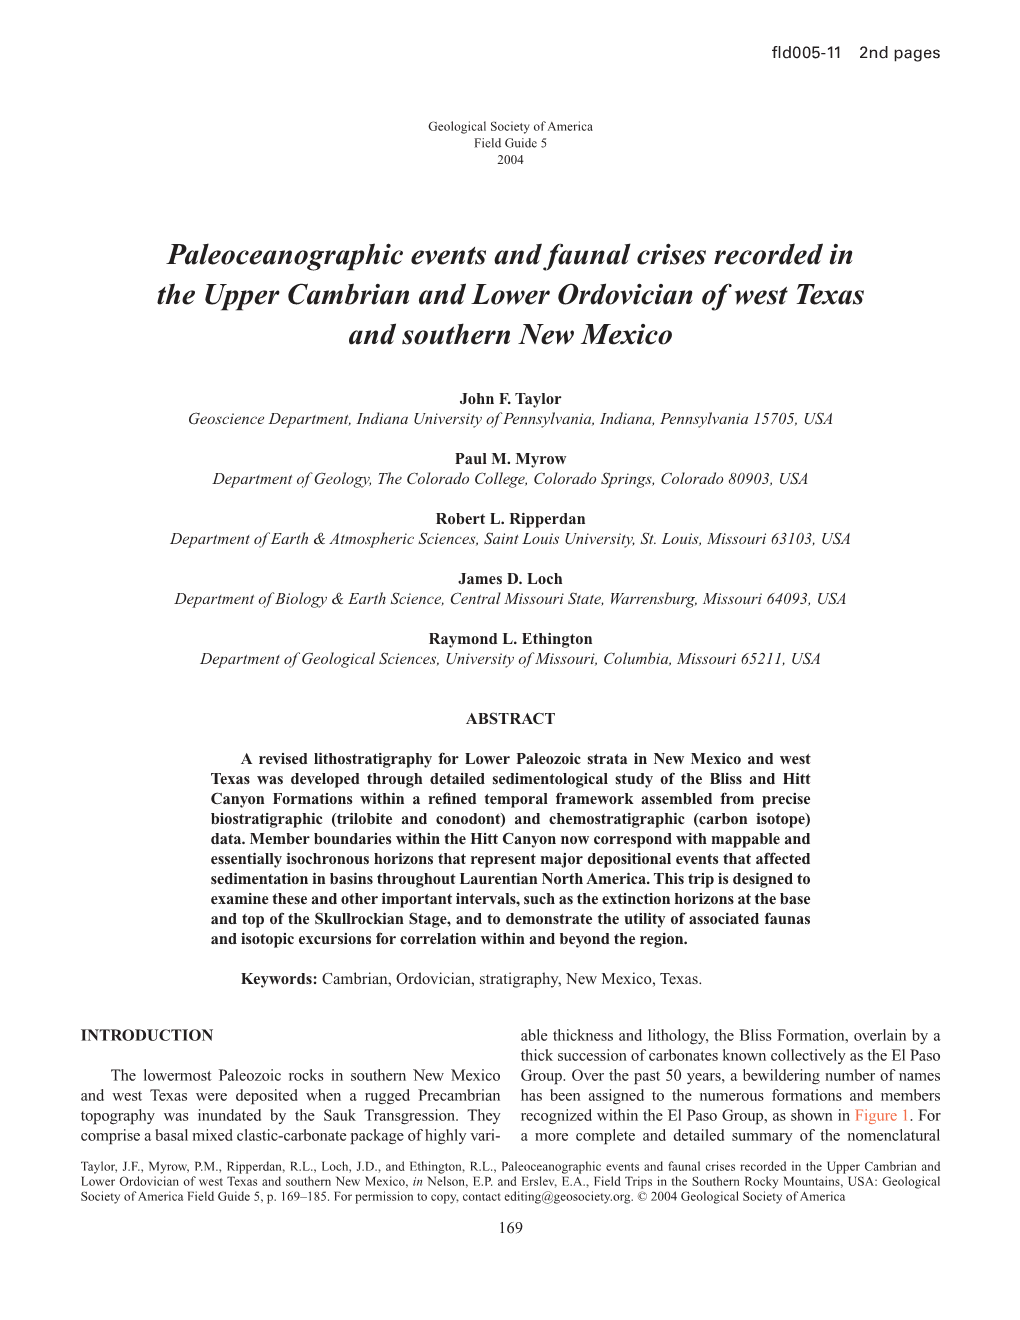 Paleoceanographic Events and Faunal Crises Recorded in the Upper Cambrian and Lower Ordovician of West Texas and Southern New Mexico